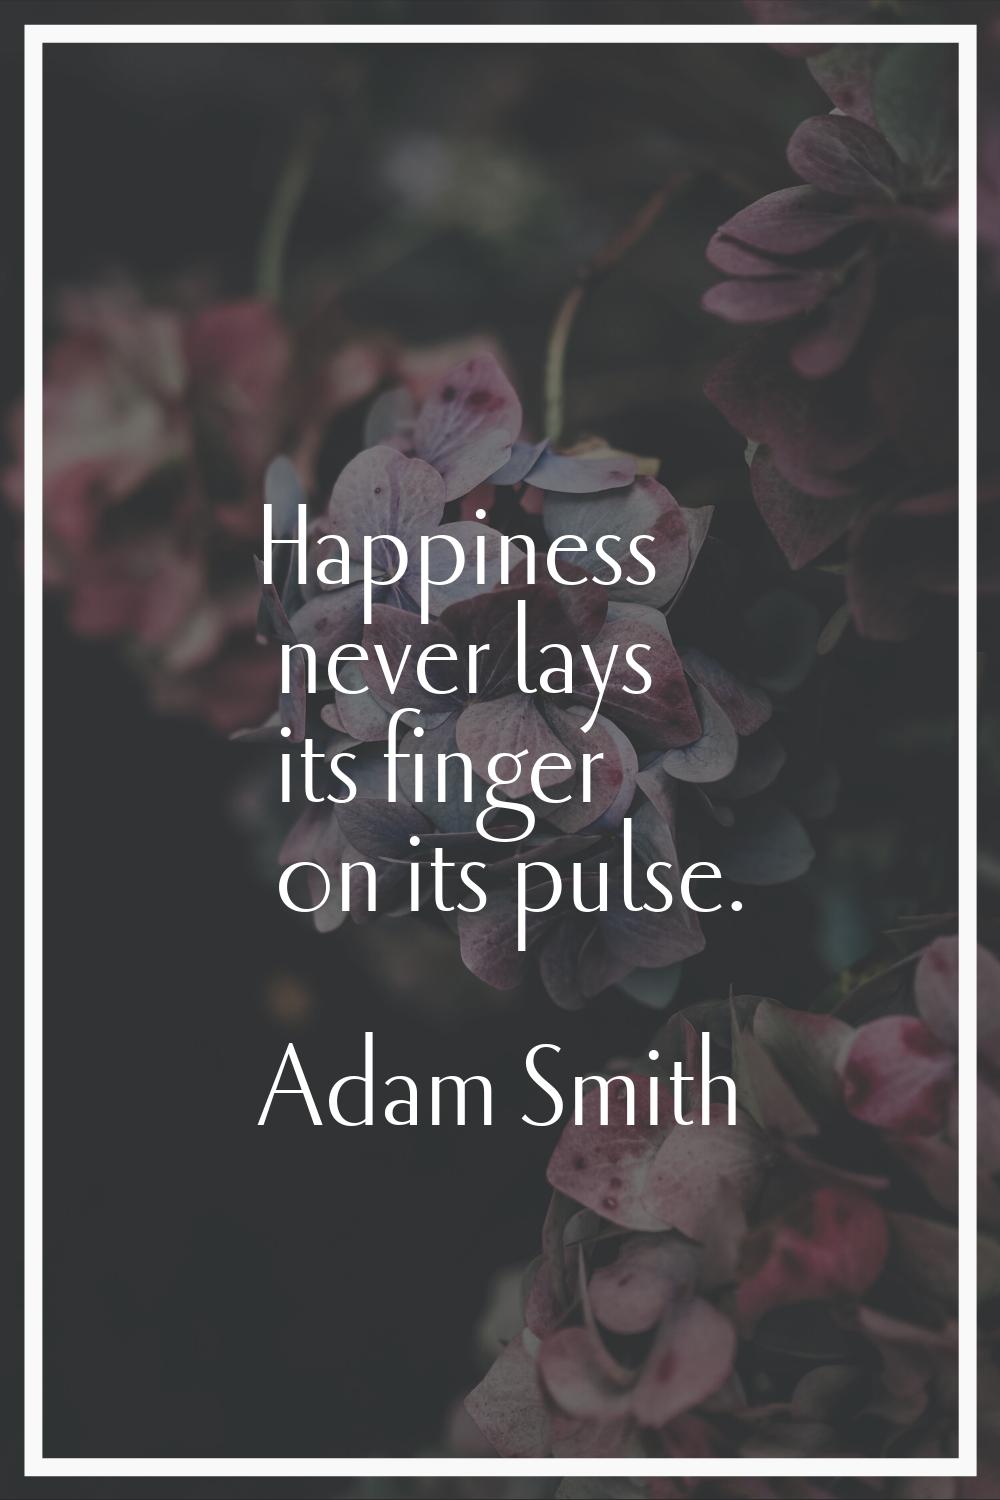 Happiness never lays its finger on its pulse.